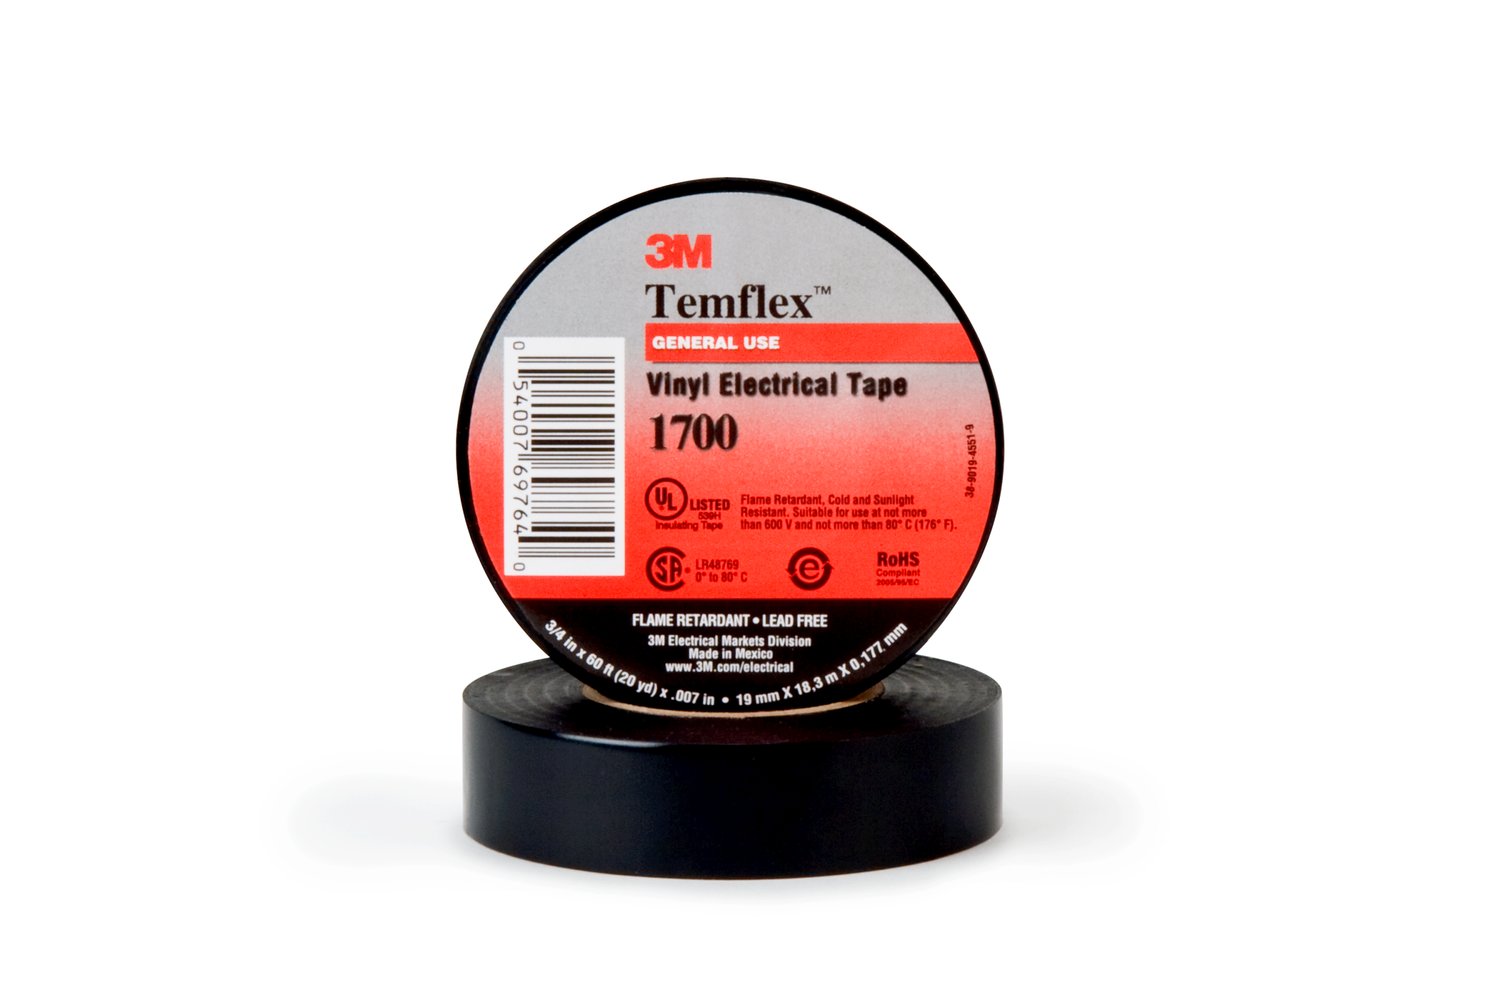 1/2" 3M Temflex 1700 Vinyl Electrical Tape with Non-Thermosetting Rubber Adhesive, black, 1/2" wide x  60 FT roll